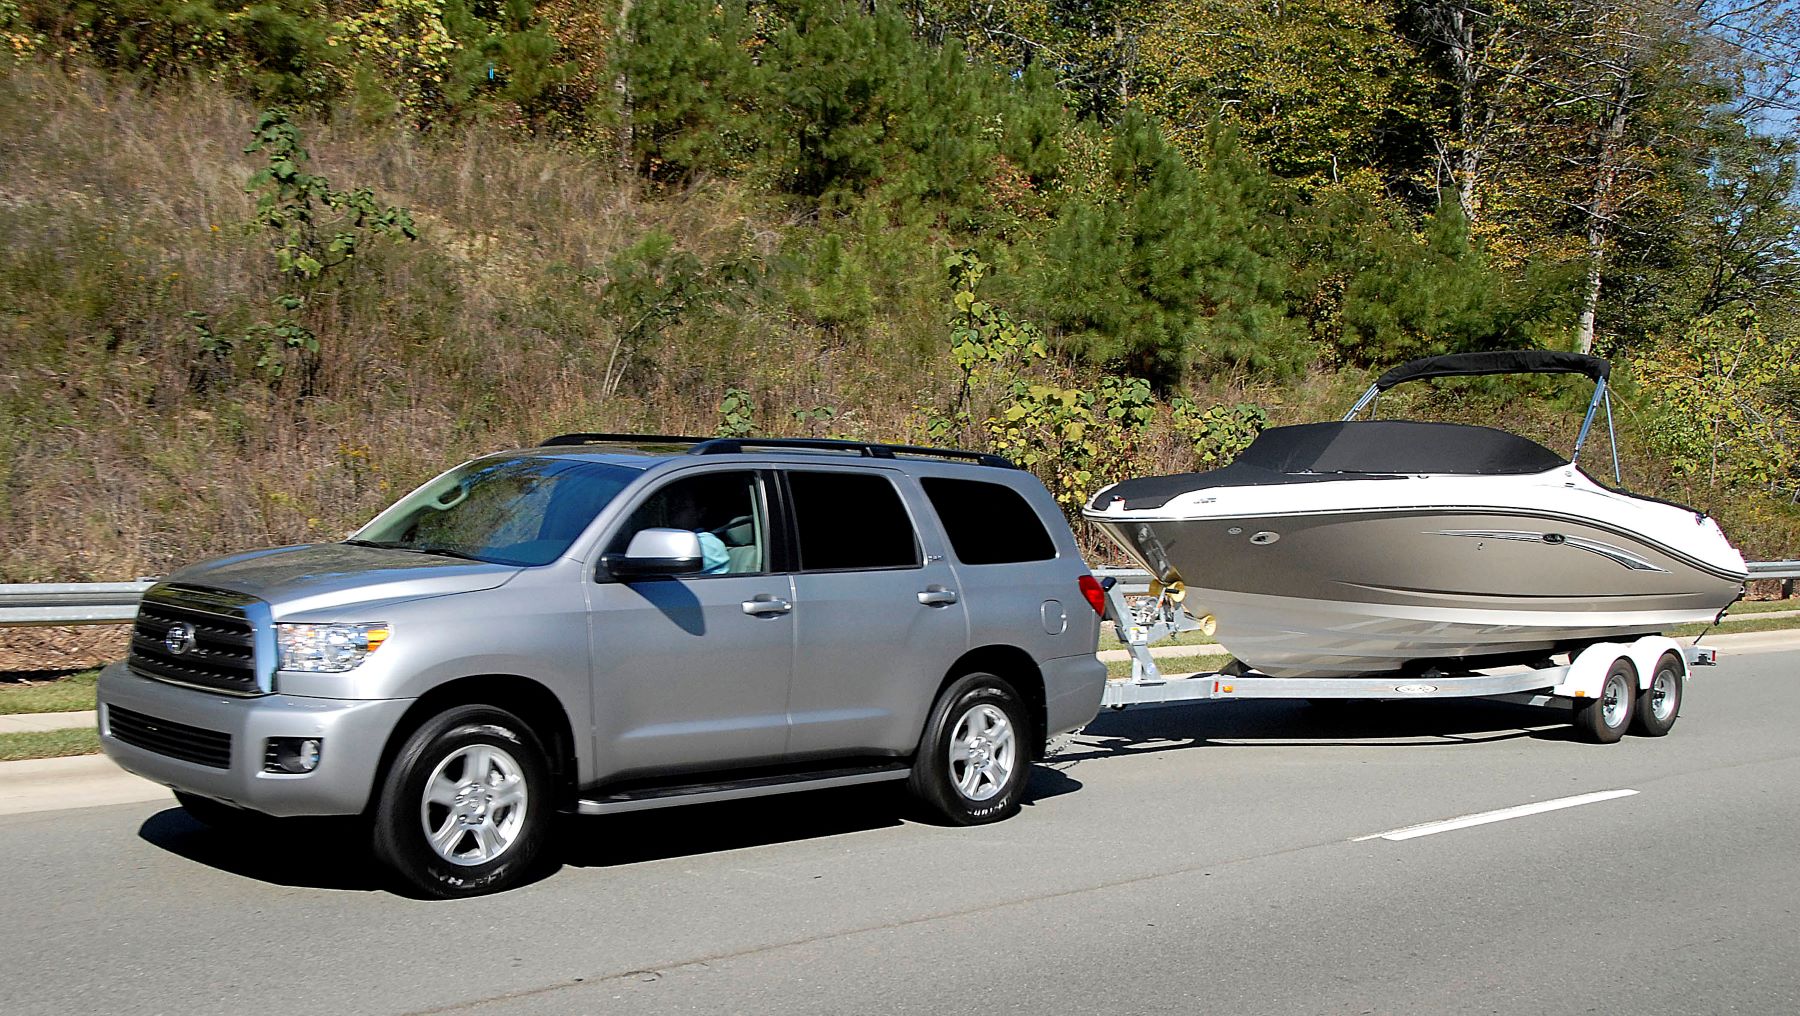 A silver gray 2008 Toyota Sequoia SUV towing a speedboat in Raleigh-Durham, North Carolina